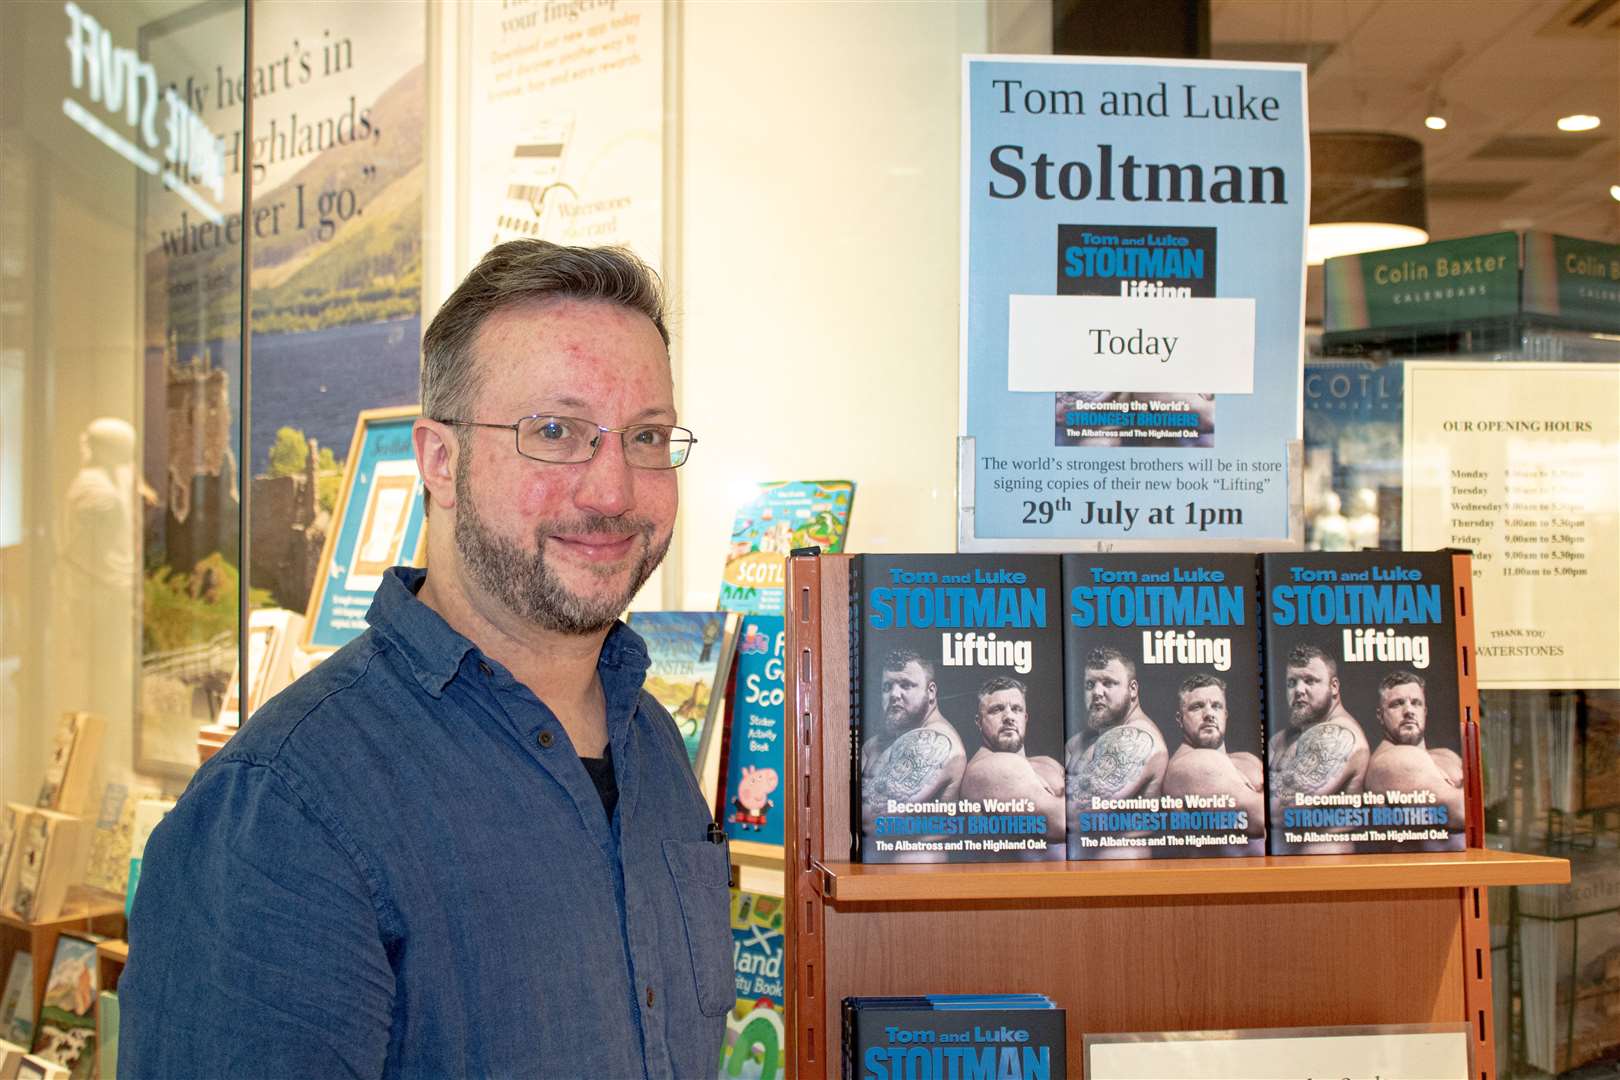 Toby Ritty, shop manager of Waterstones Inverness. Photo: Niall Harkiss